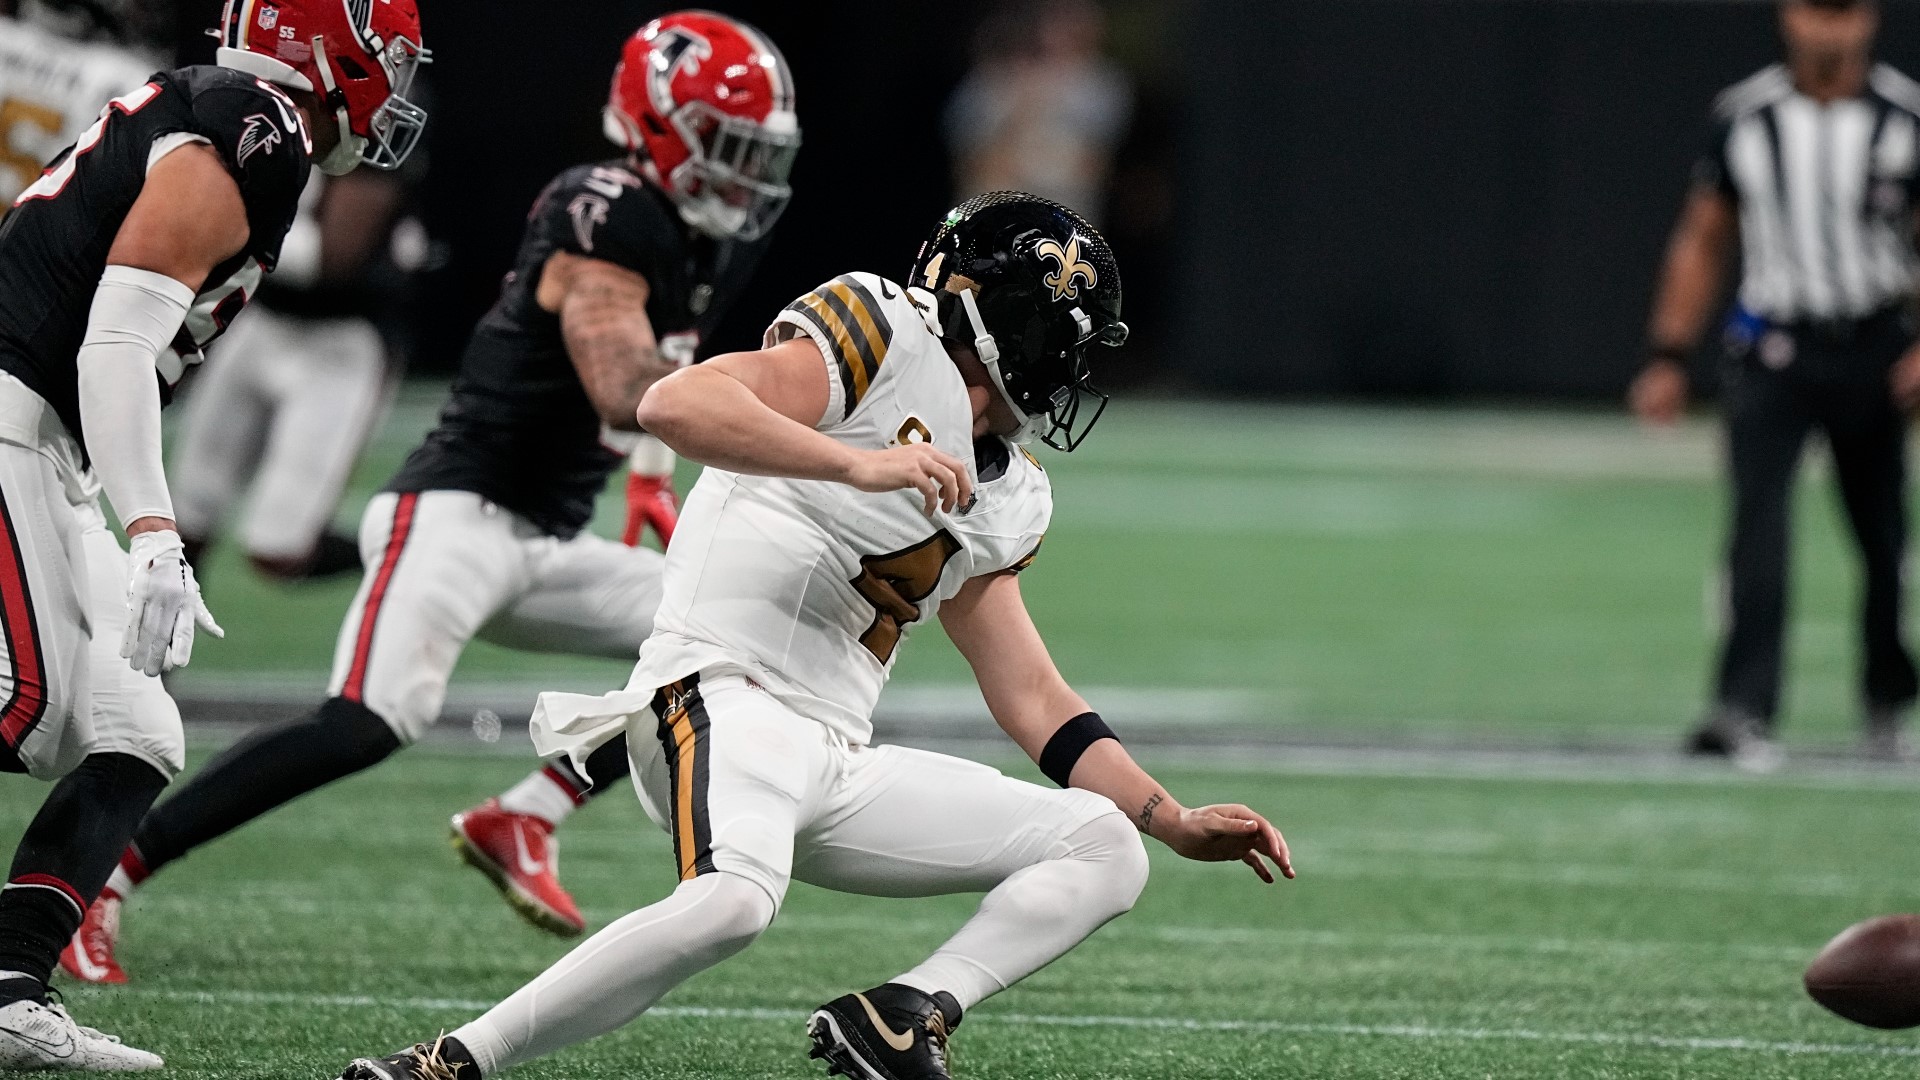 WWL-TV Sports Director Doug Mouton shares his four takeaways from the Saints' loss against the Atlanta Falcons